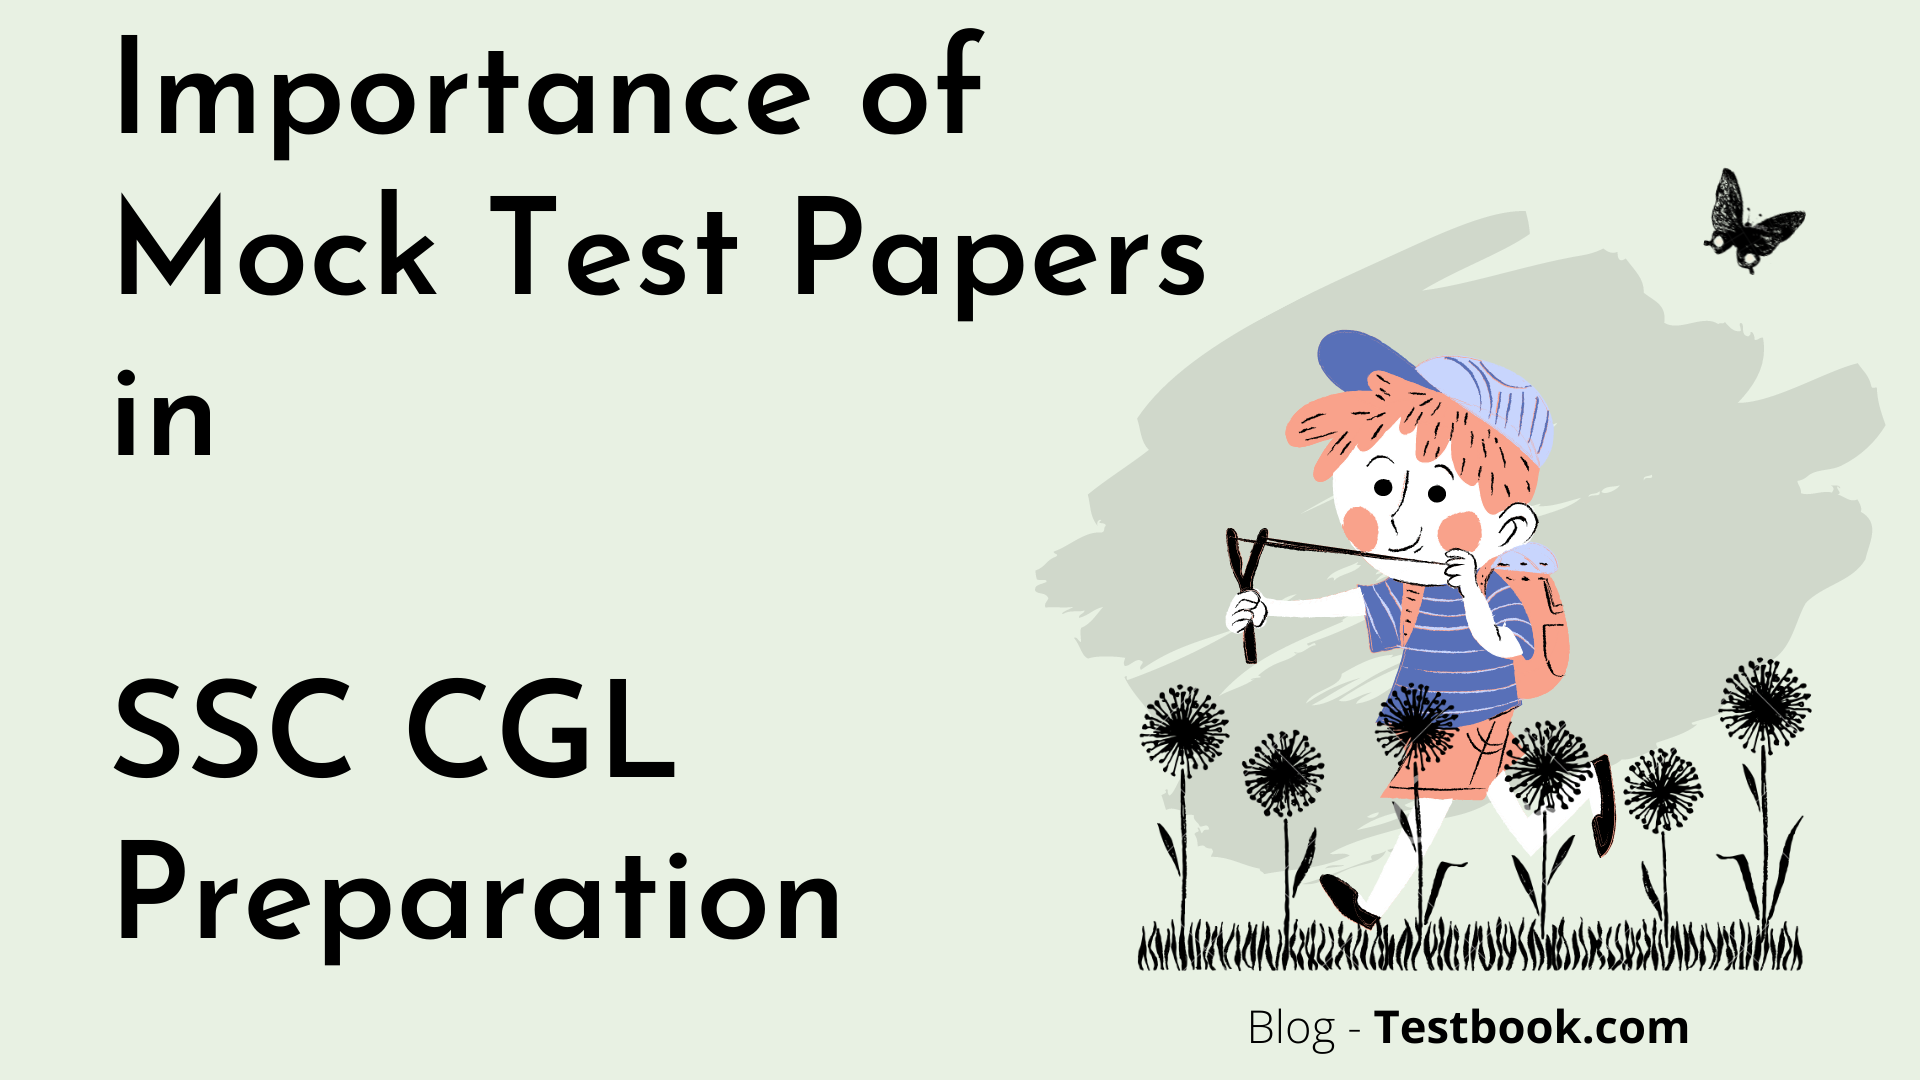 Importance of Mock Test papers in SSC CGL preparation